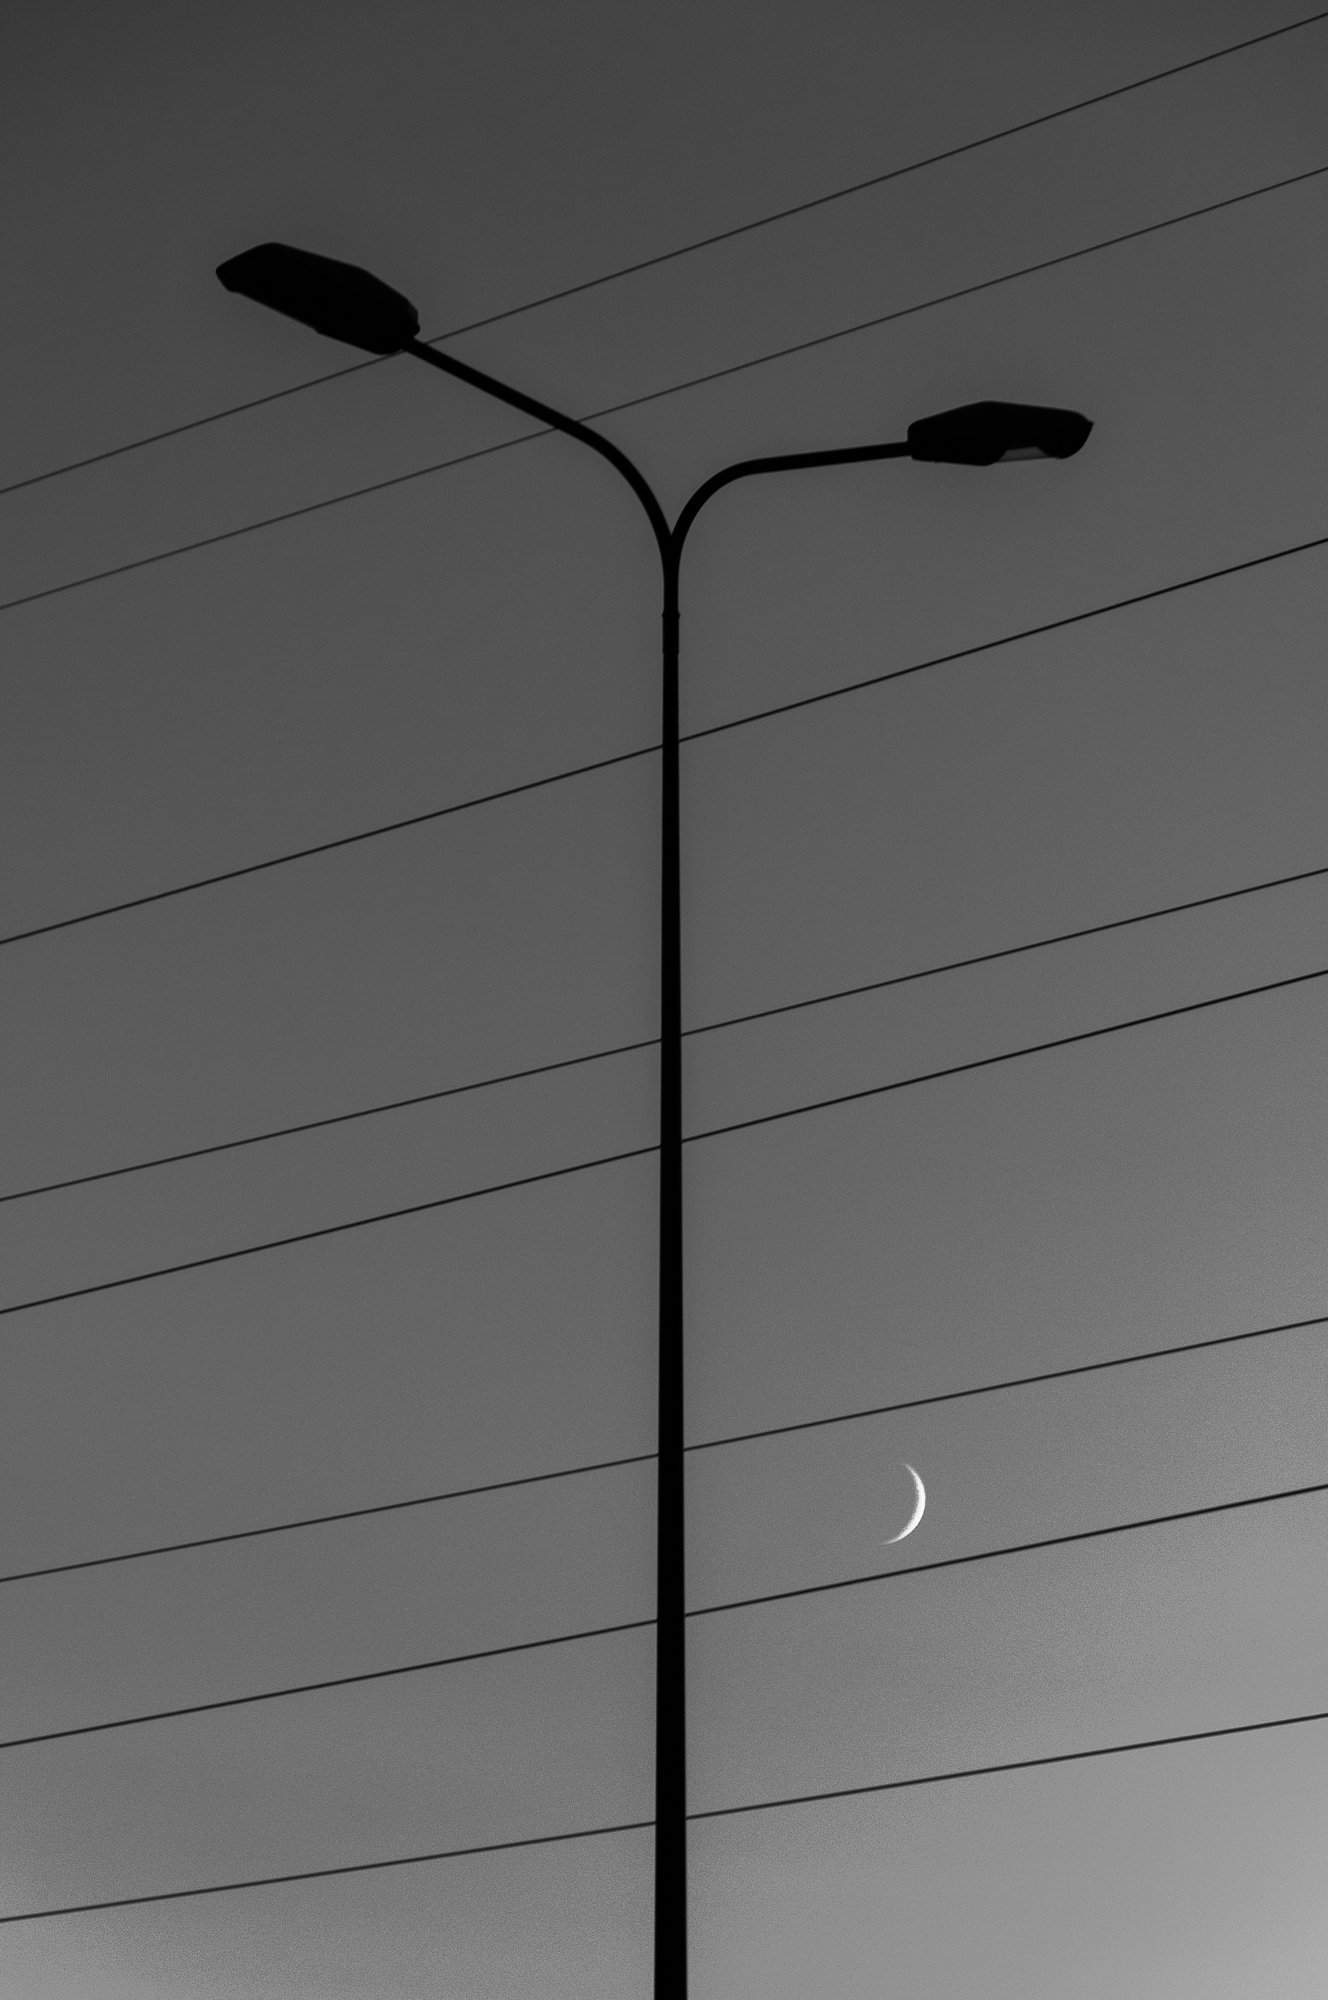 Adam Mazek Photography Warsaw 2020. Post: "I do believe in Youth." Street lamp. Perspective. Minimalism.